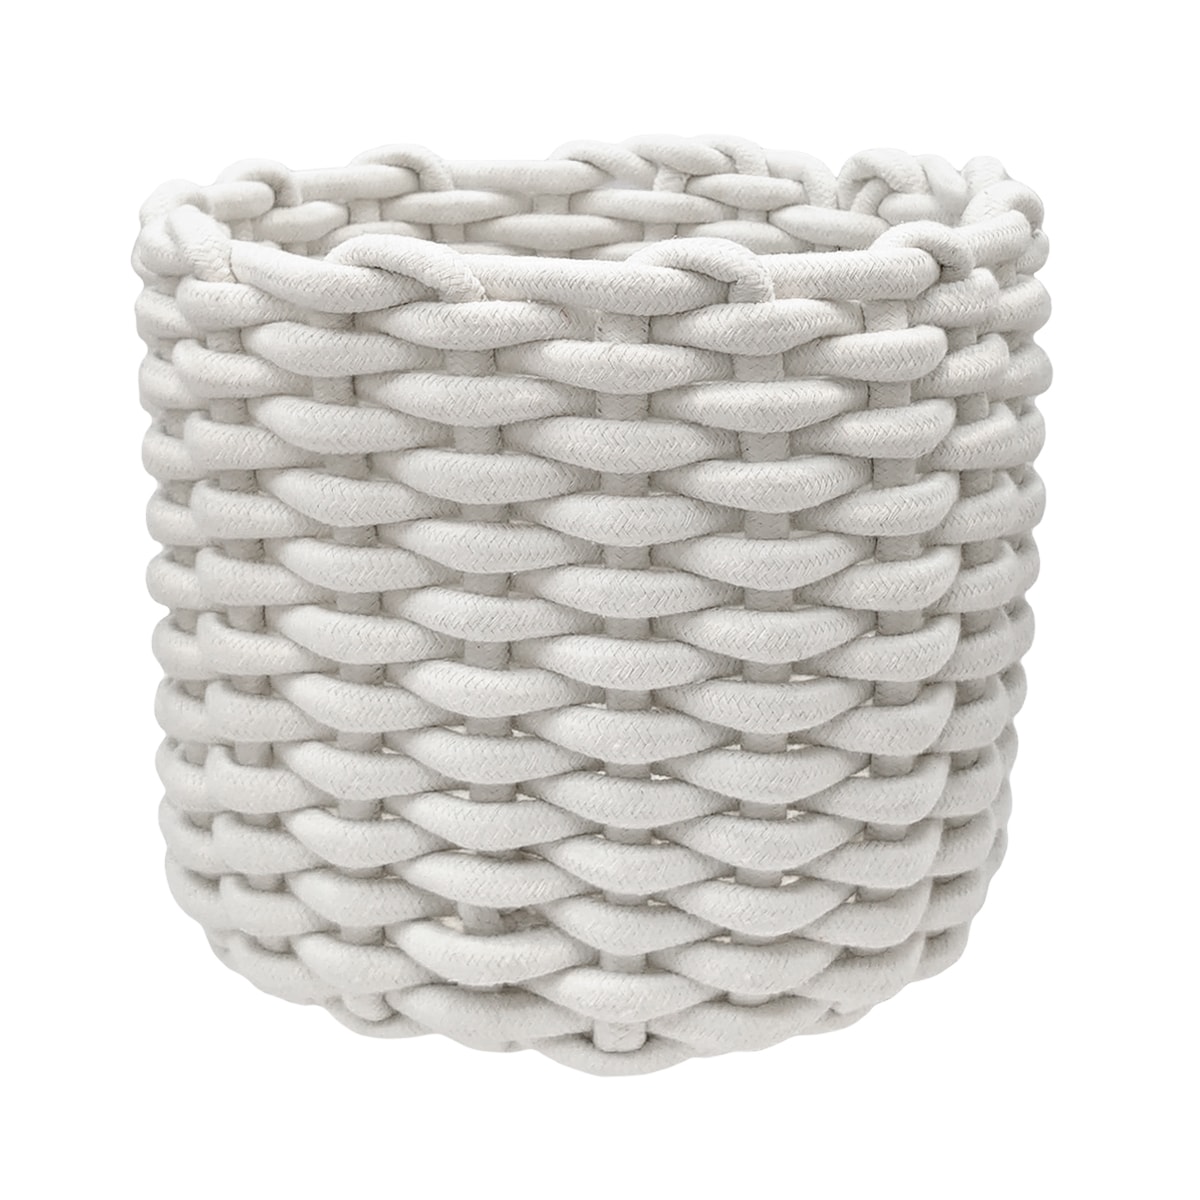 Small Rope Coiled on White Background Stock Photo - Image of bind, rope:  31524962